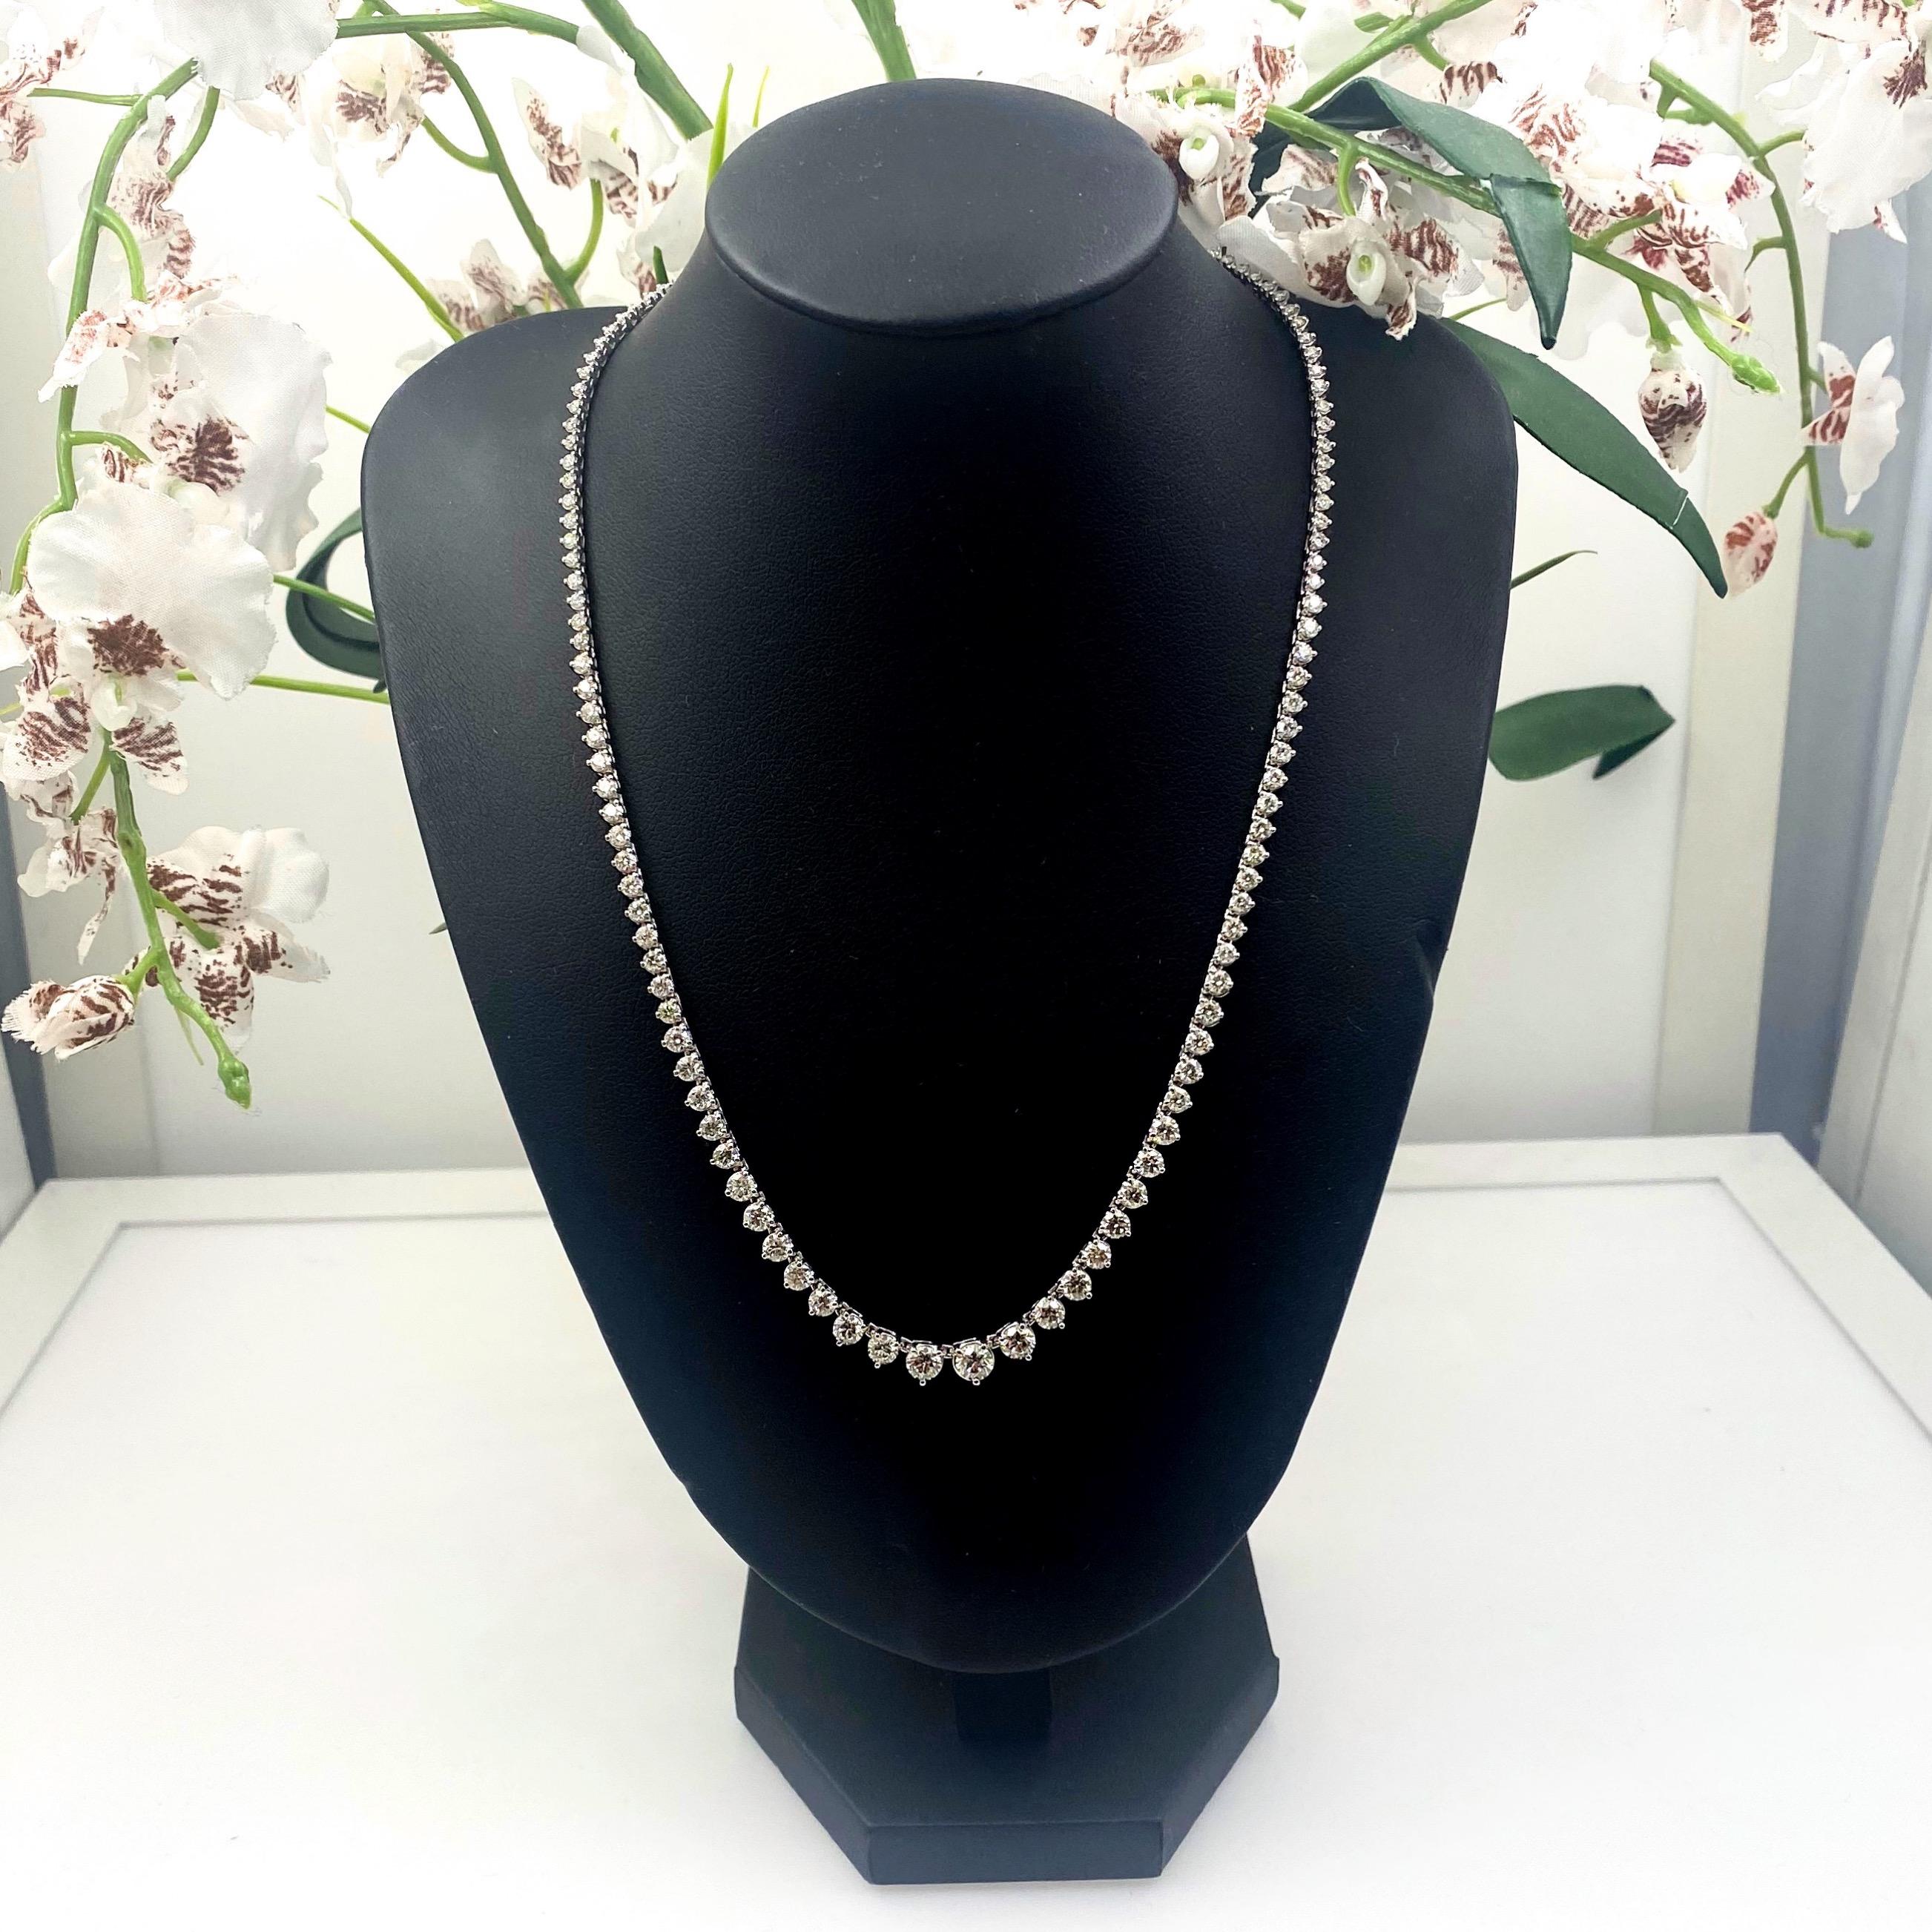 Diamond Riviera Necklace 7.00 tcw in 14kt White Gold 5